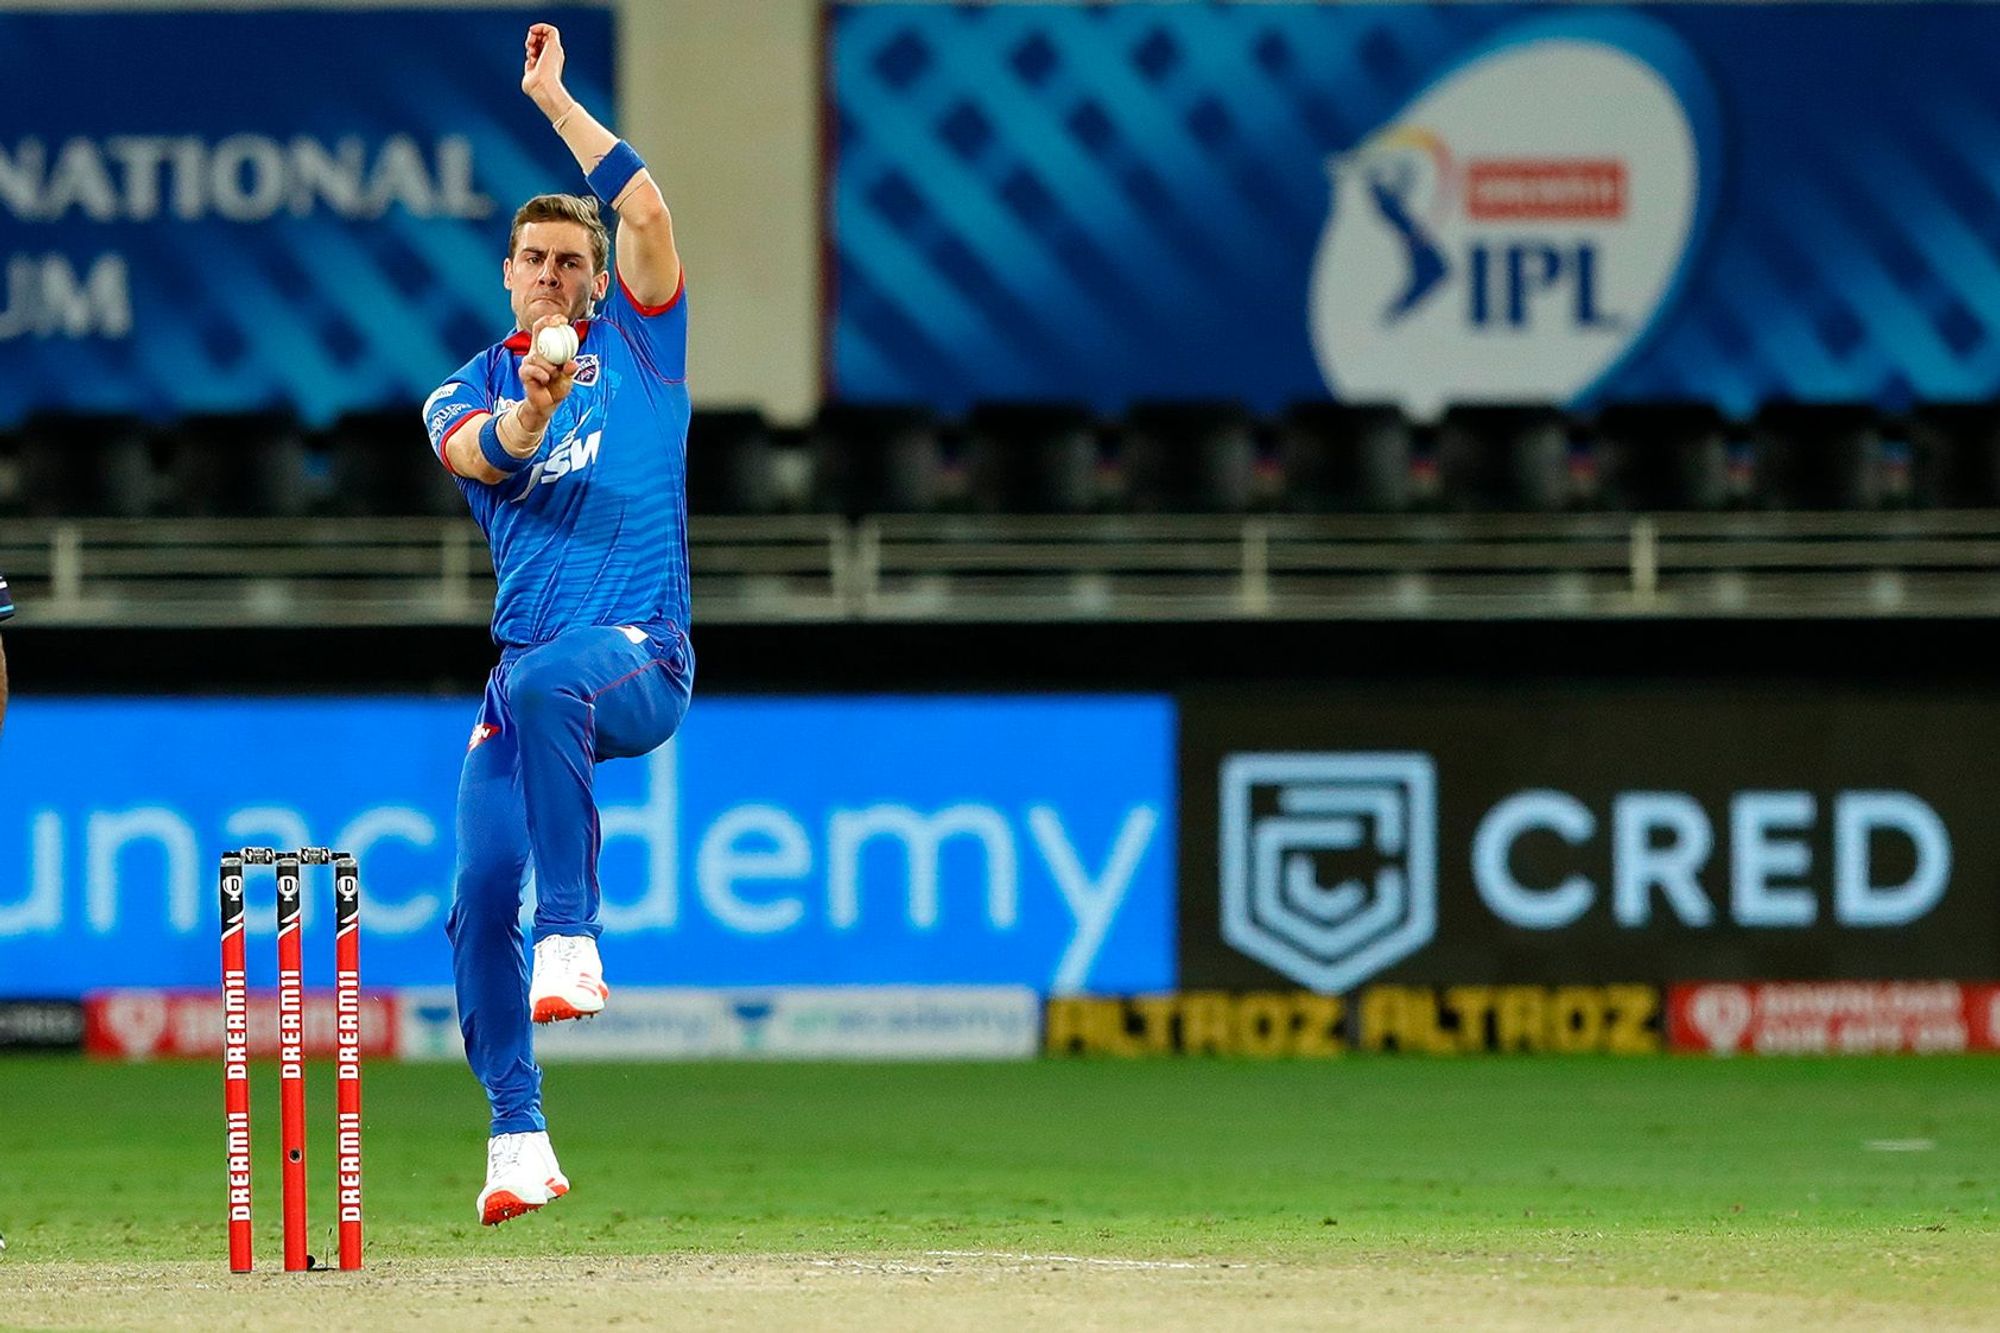 IPL 2020 | Anrich Nortje's over to Buttler is the best cricket I have seen this entire IPL, reckons Joy Bhattacharjya